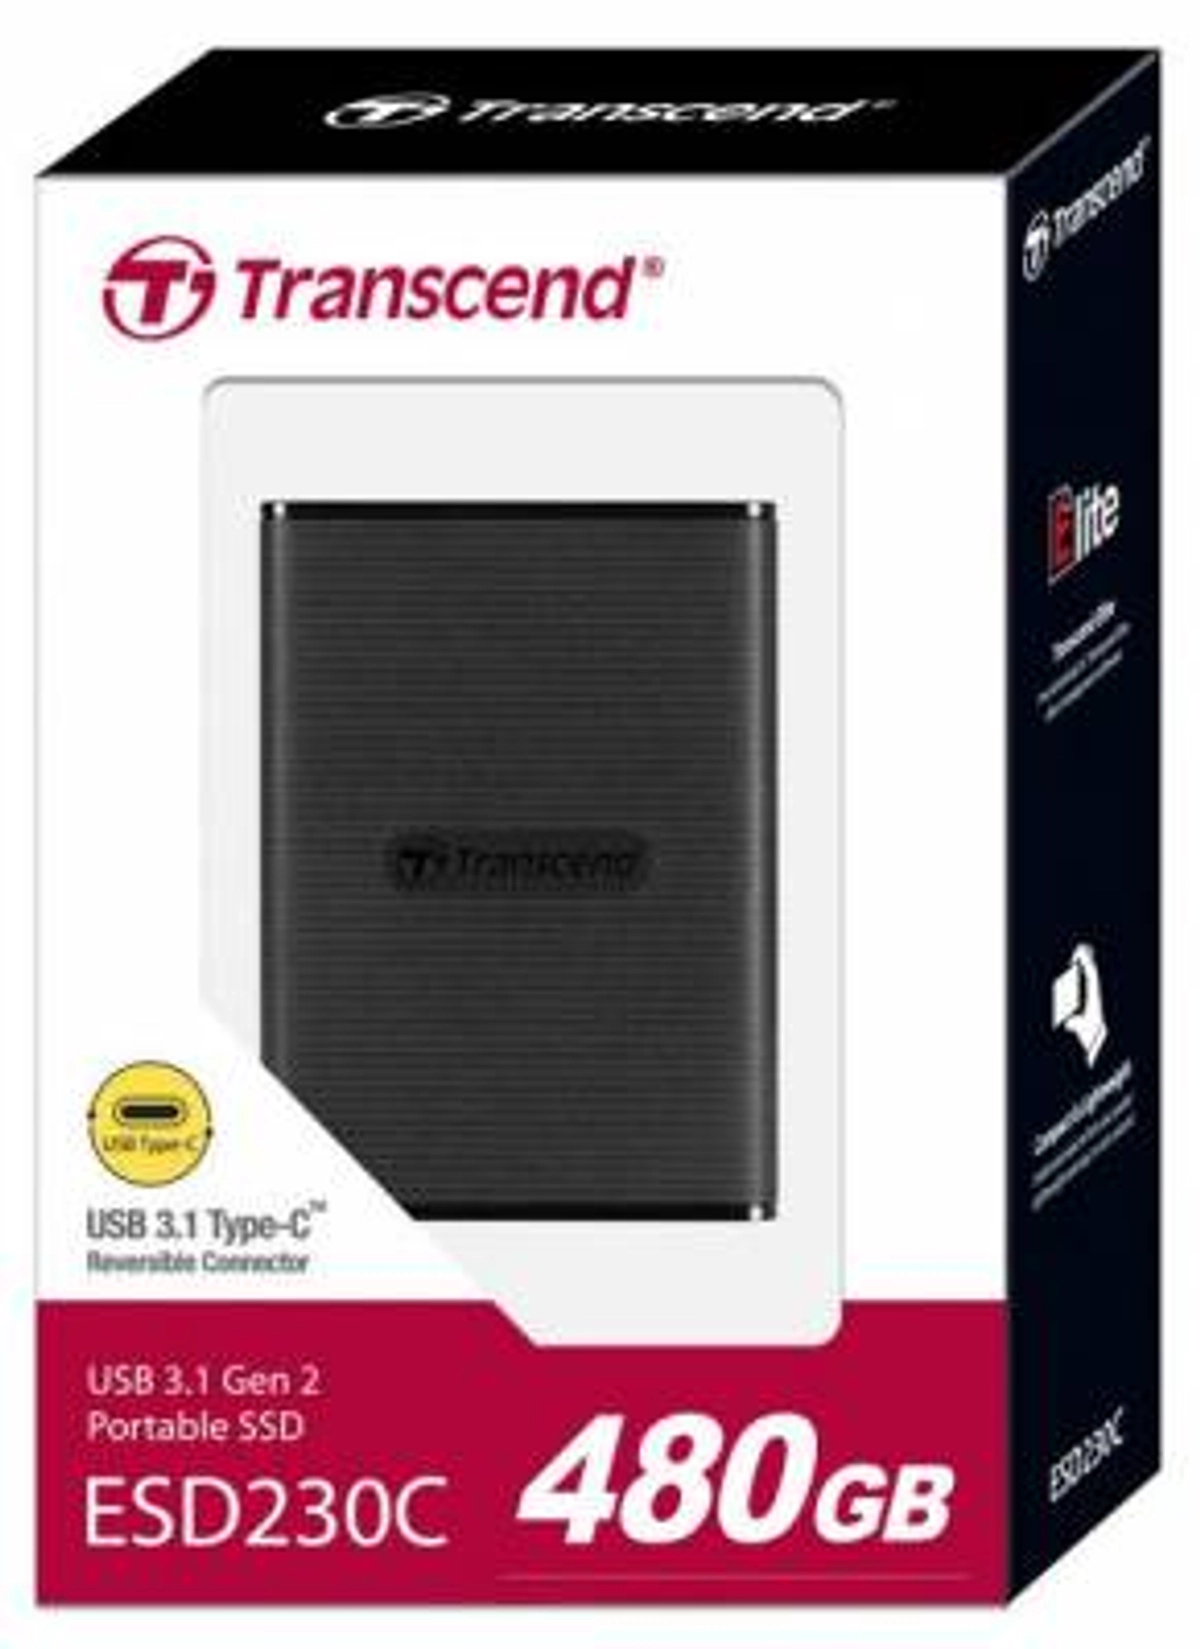 Transcend ESD310C Dual-Interface USB3.2 Gen2 10Gbps SSD Review - Back2Gaming